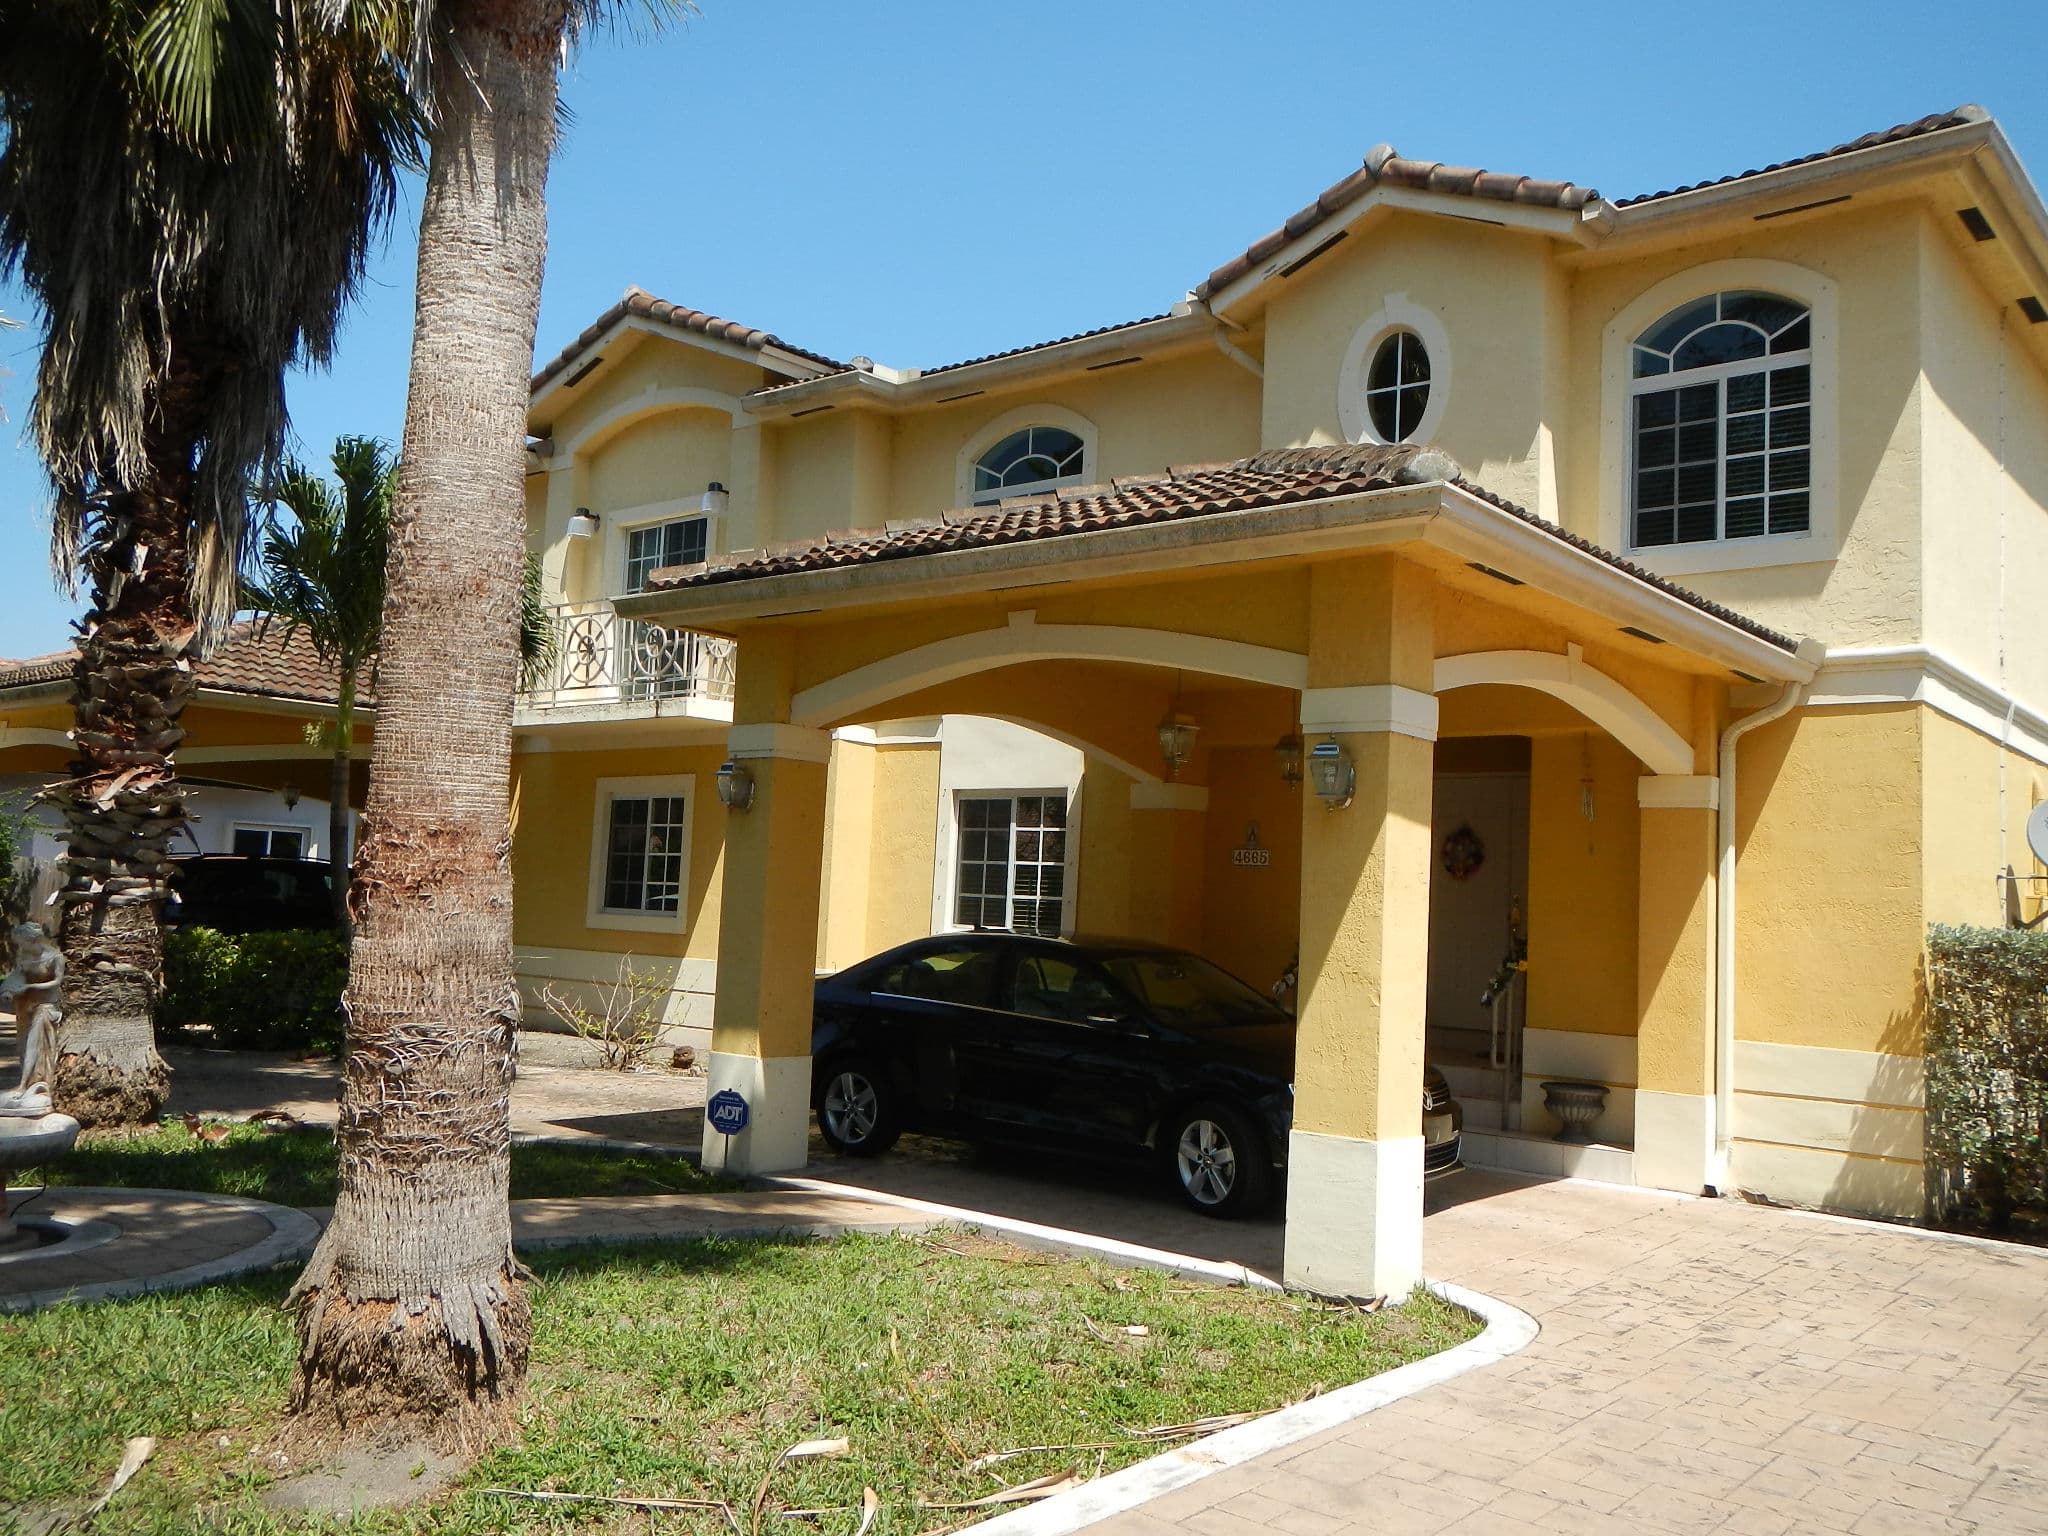 Valuable Inspections For Florida Homeowners